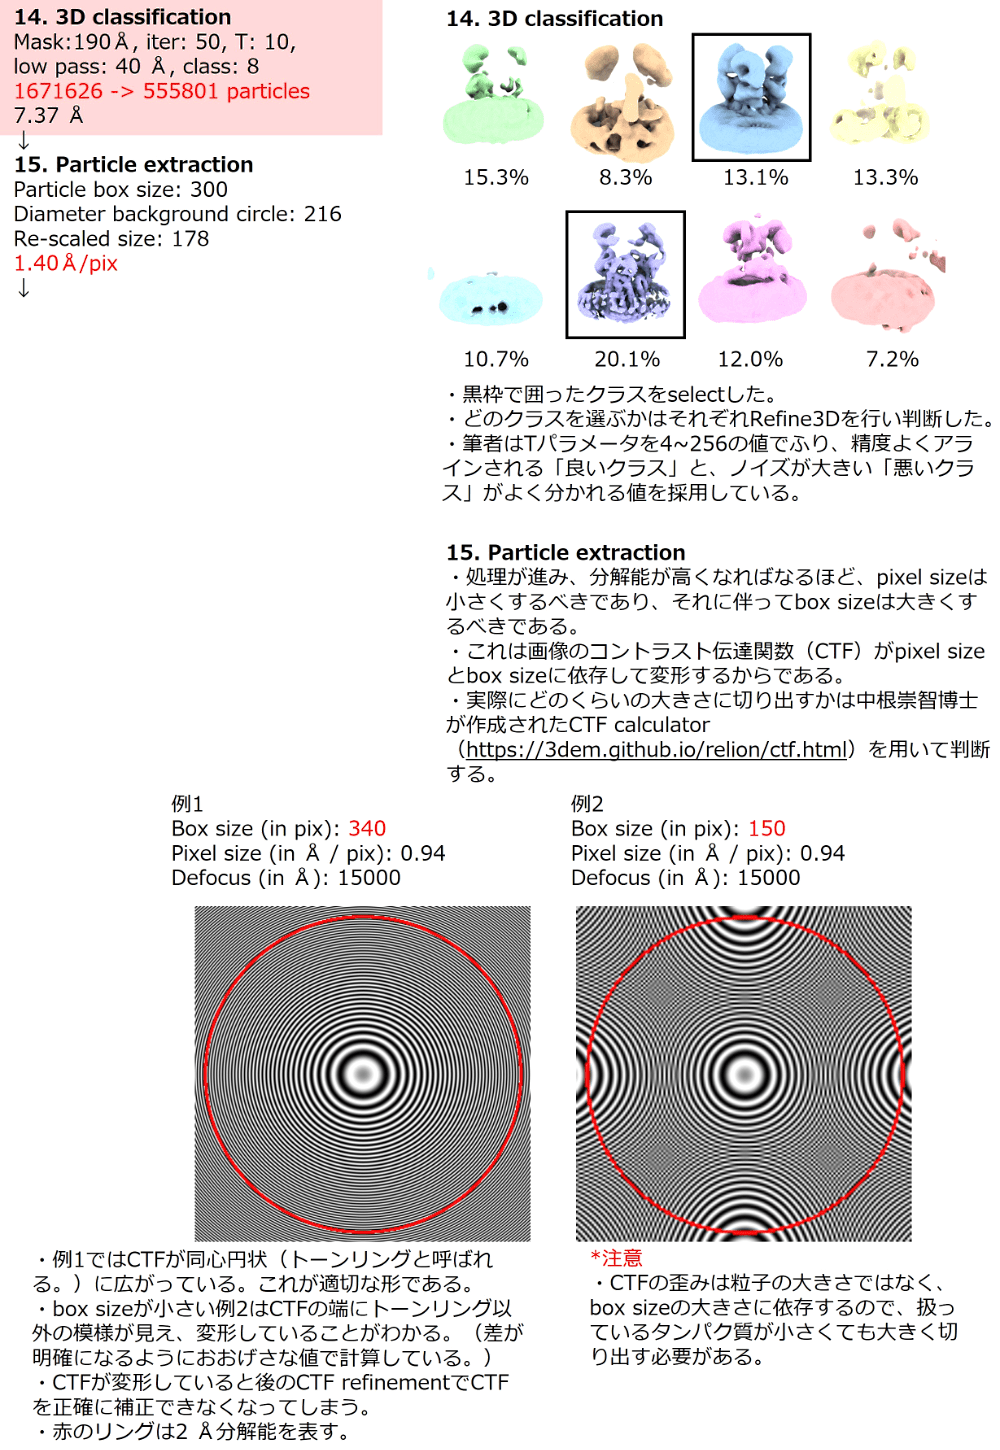 3D classification①とparticle extraction